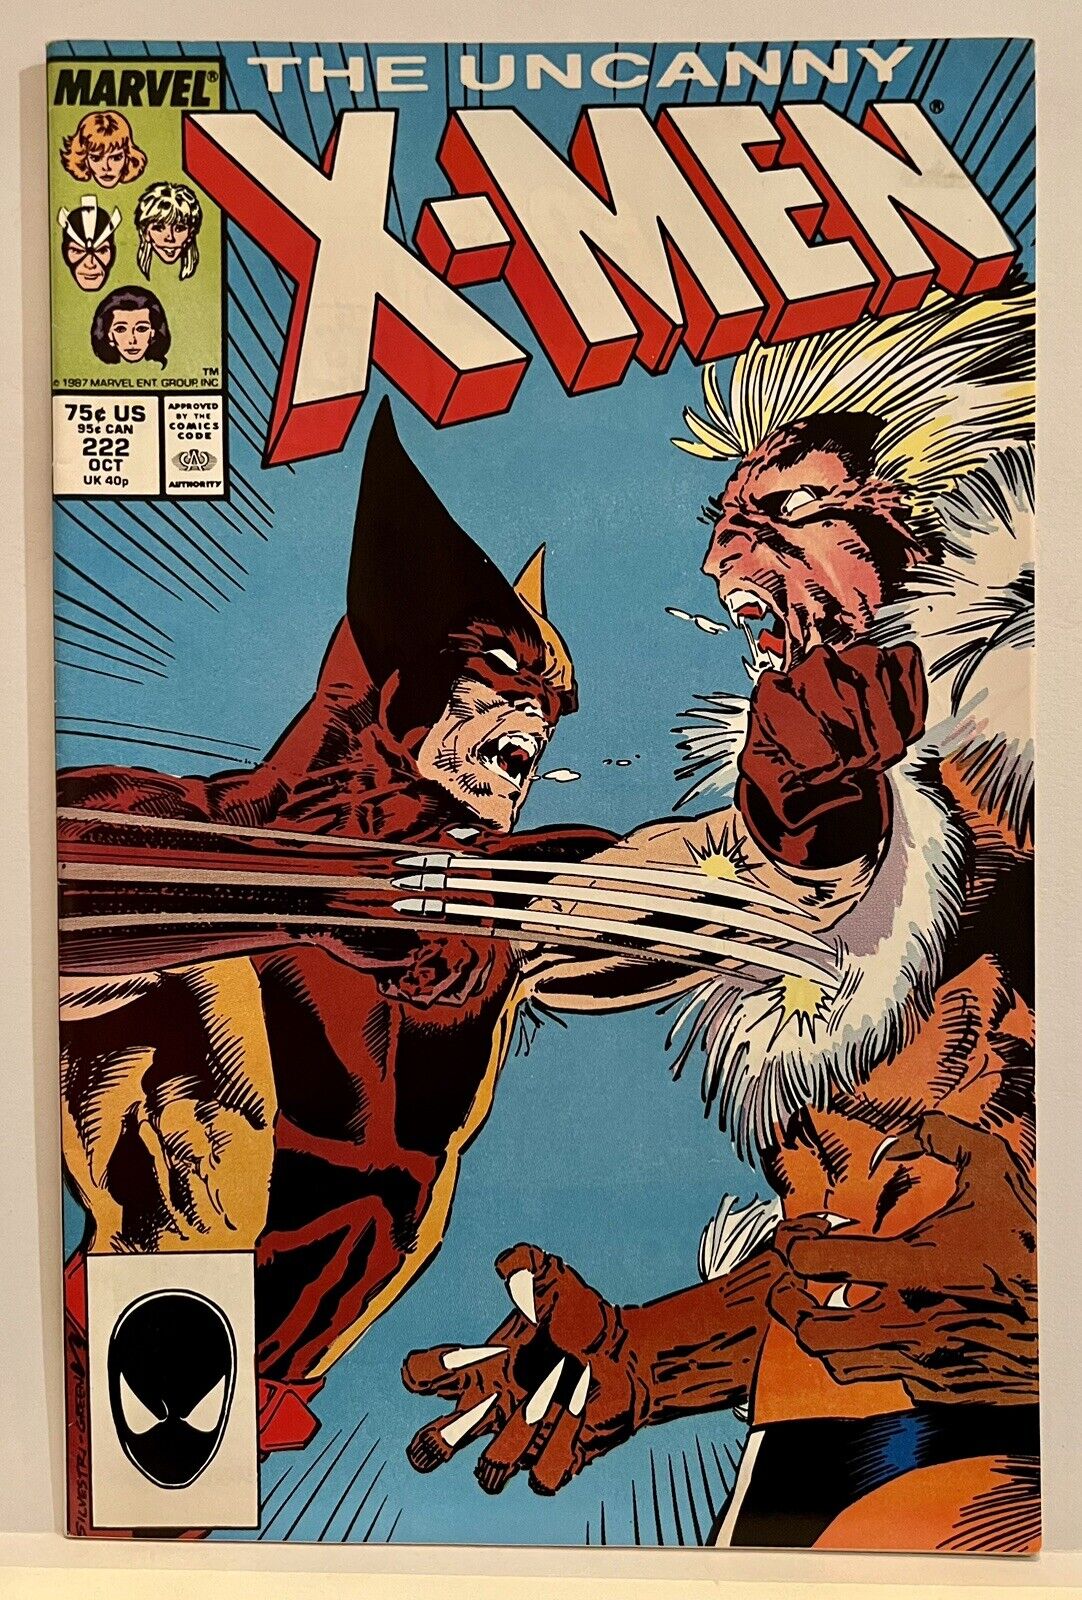 The Uncanny X-Men #222 Marvel OCT 1987, VF or Better, A Really Nice Book